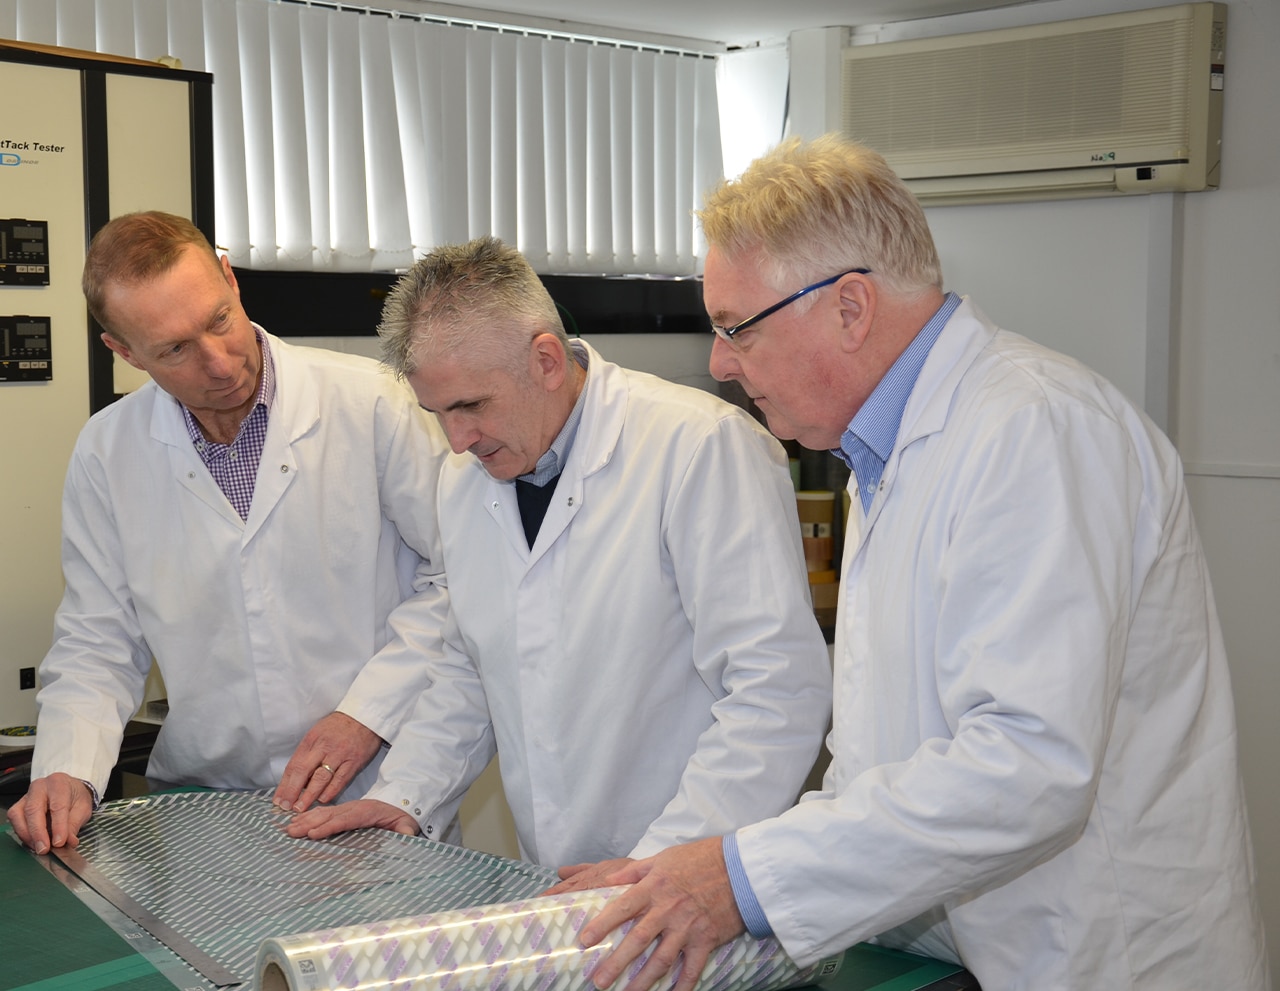 Three packaging experts looking at packaging